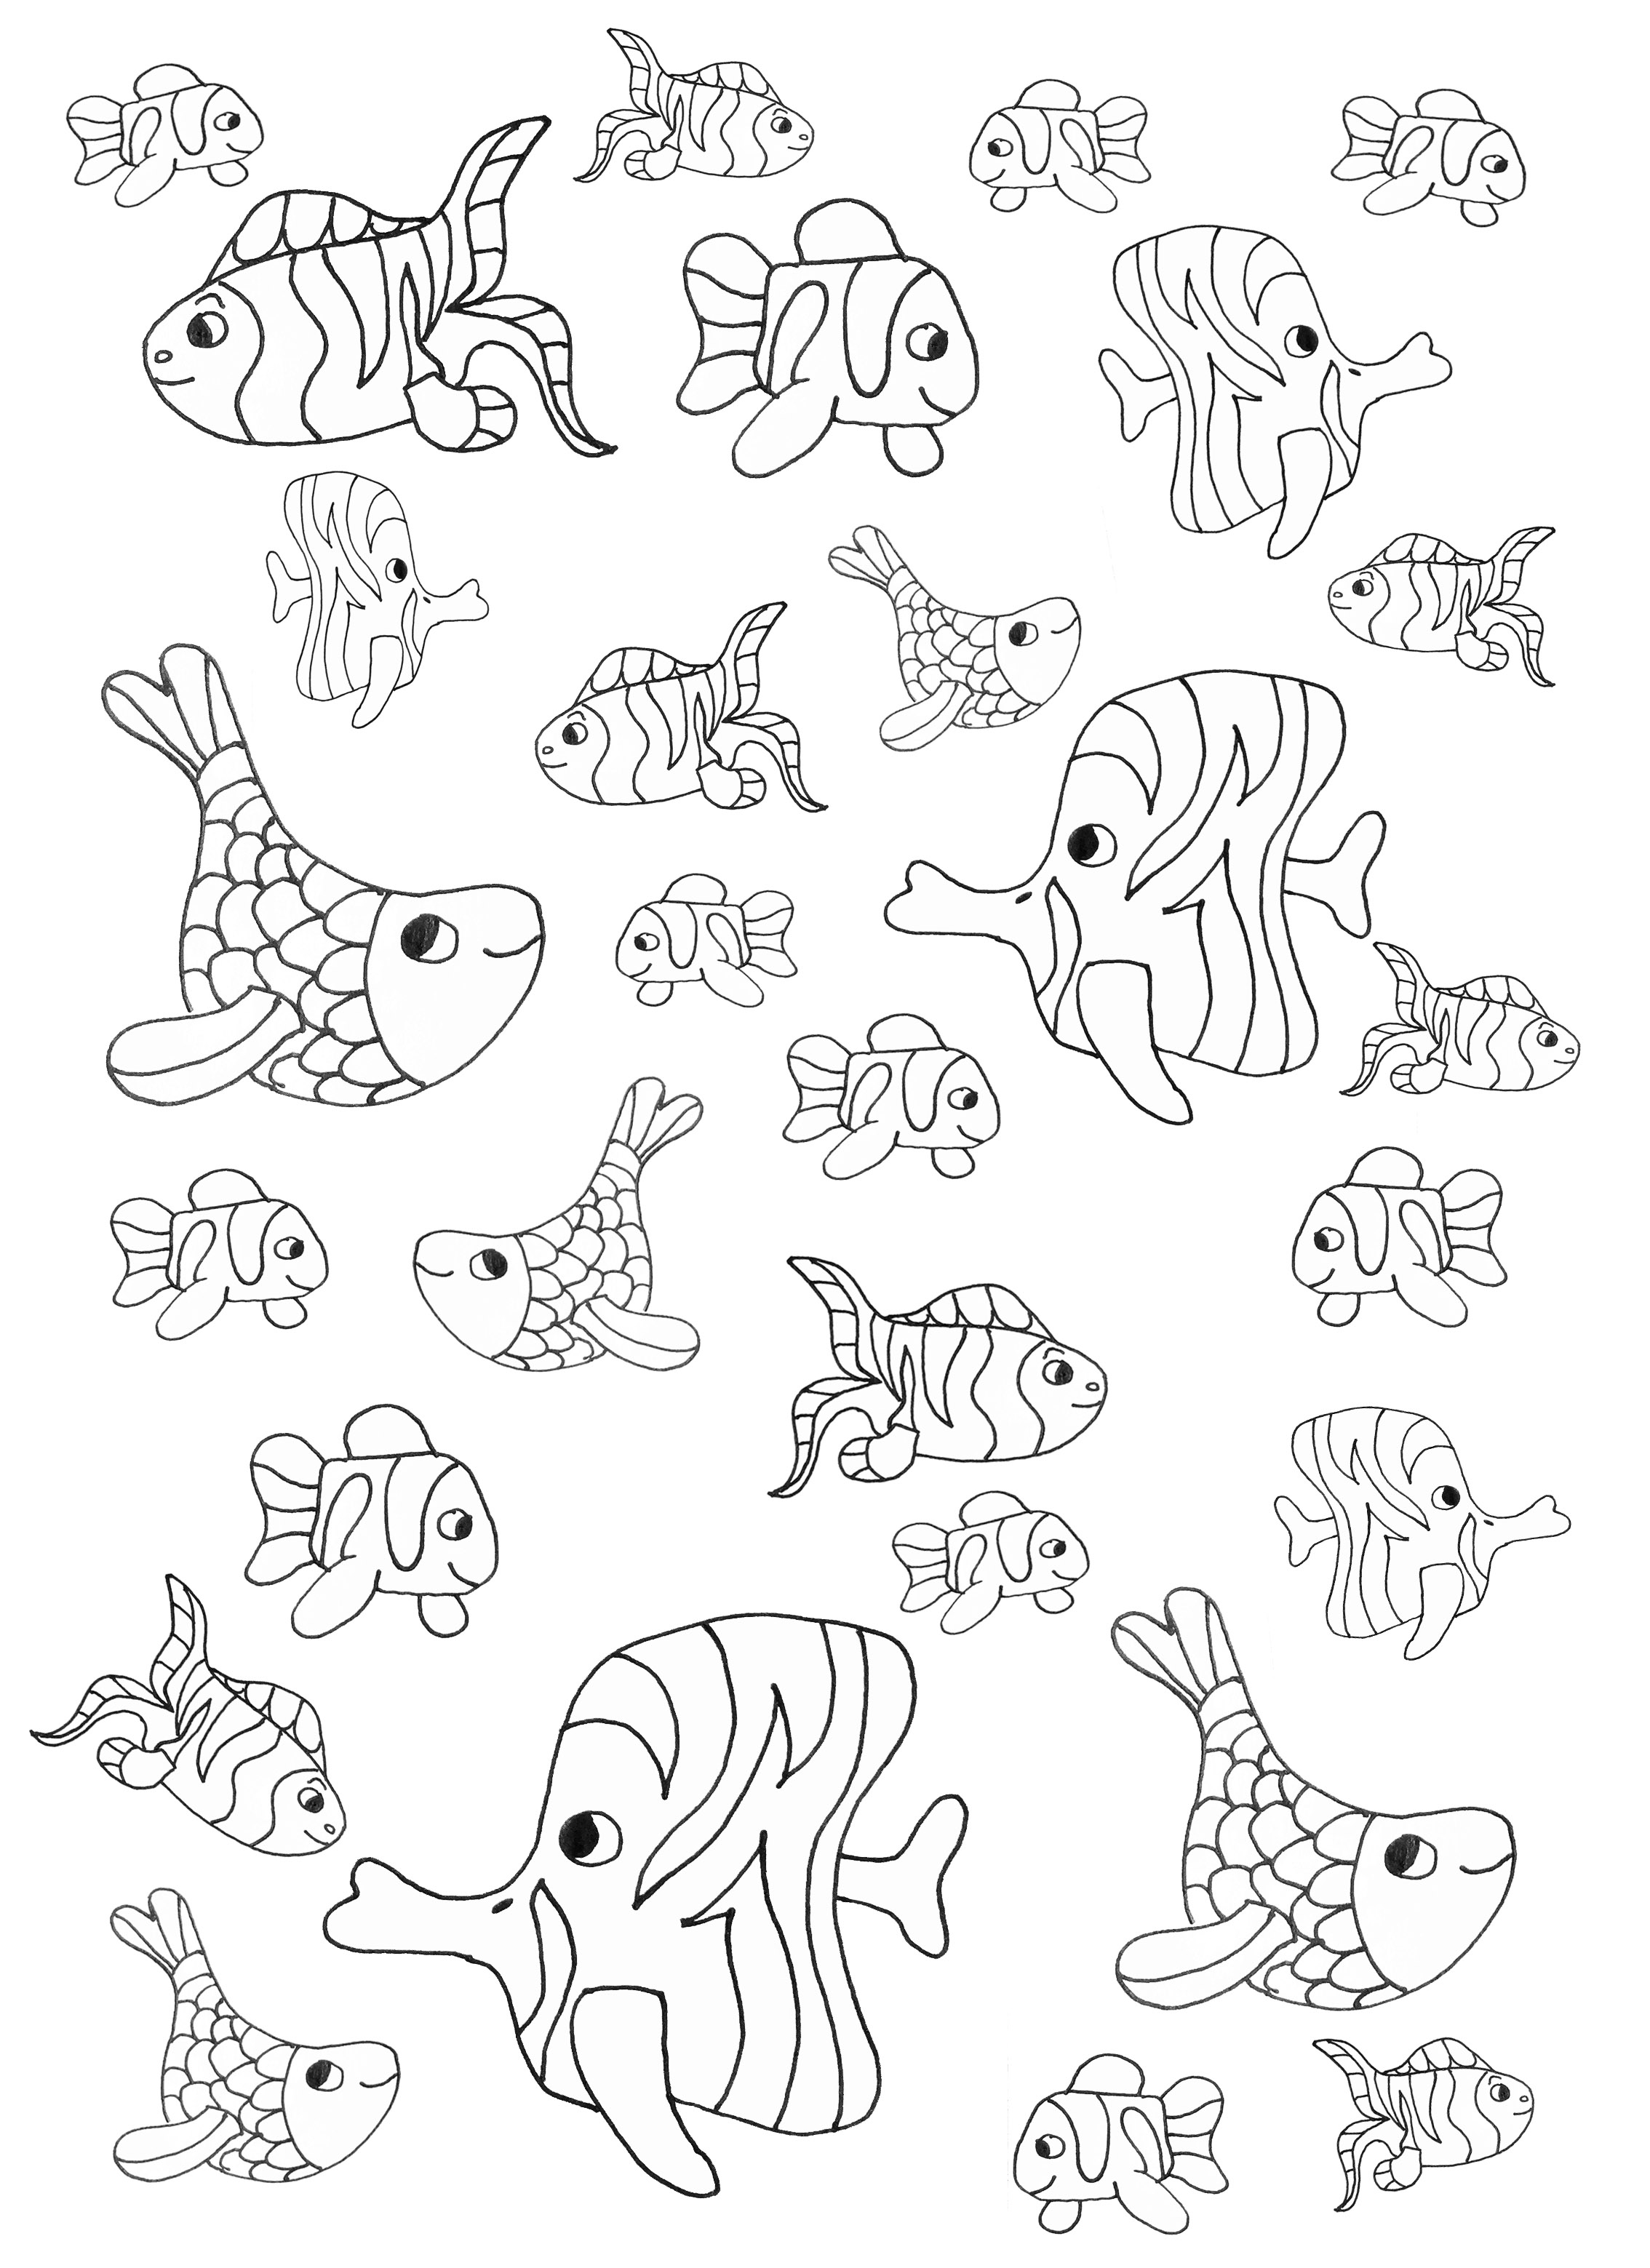 Little fishes - Water worlds Adult Coloring Pages